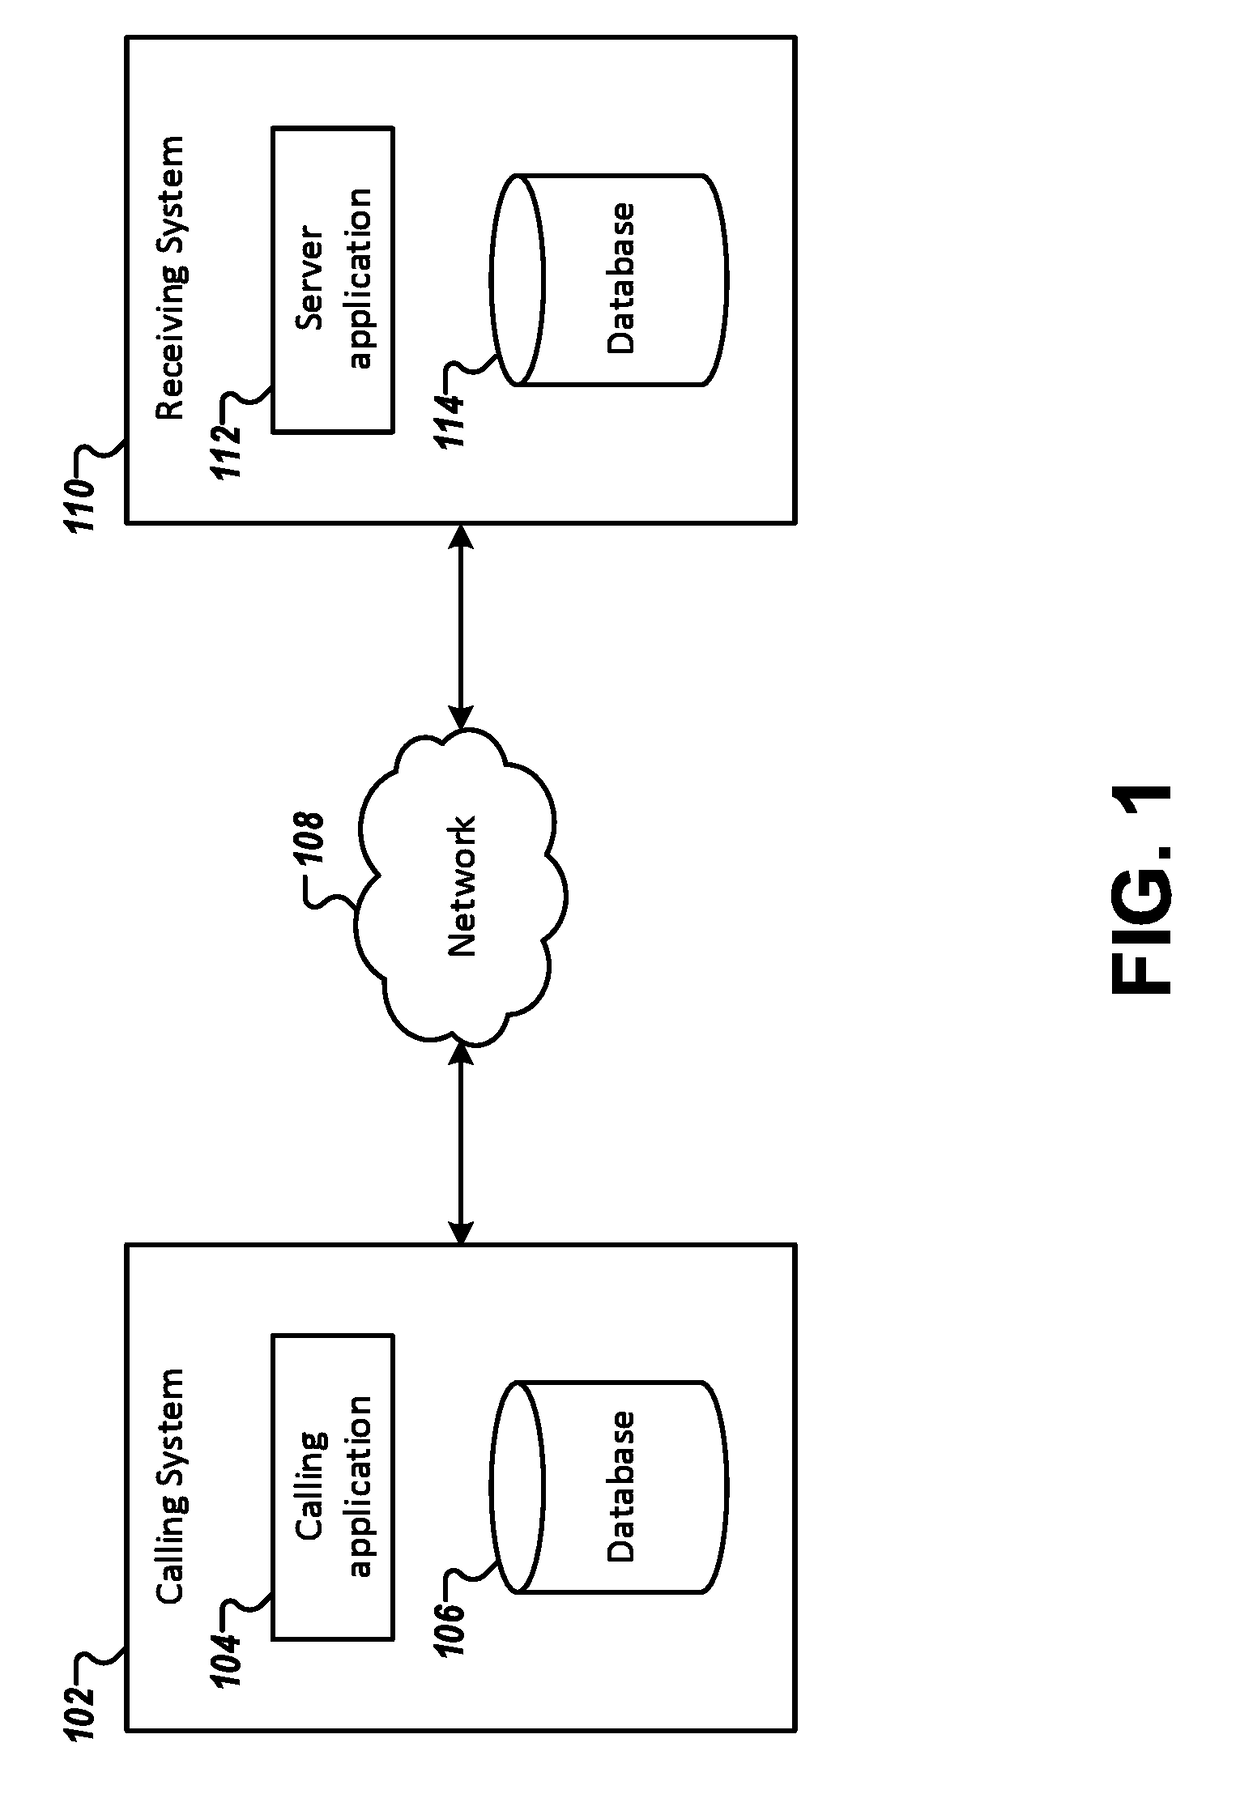 Methods and apparatuses for improved network communication using a message integrity secure token